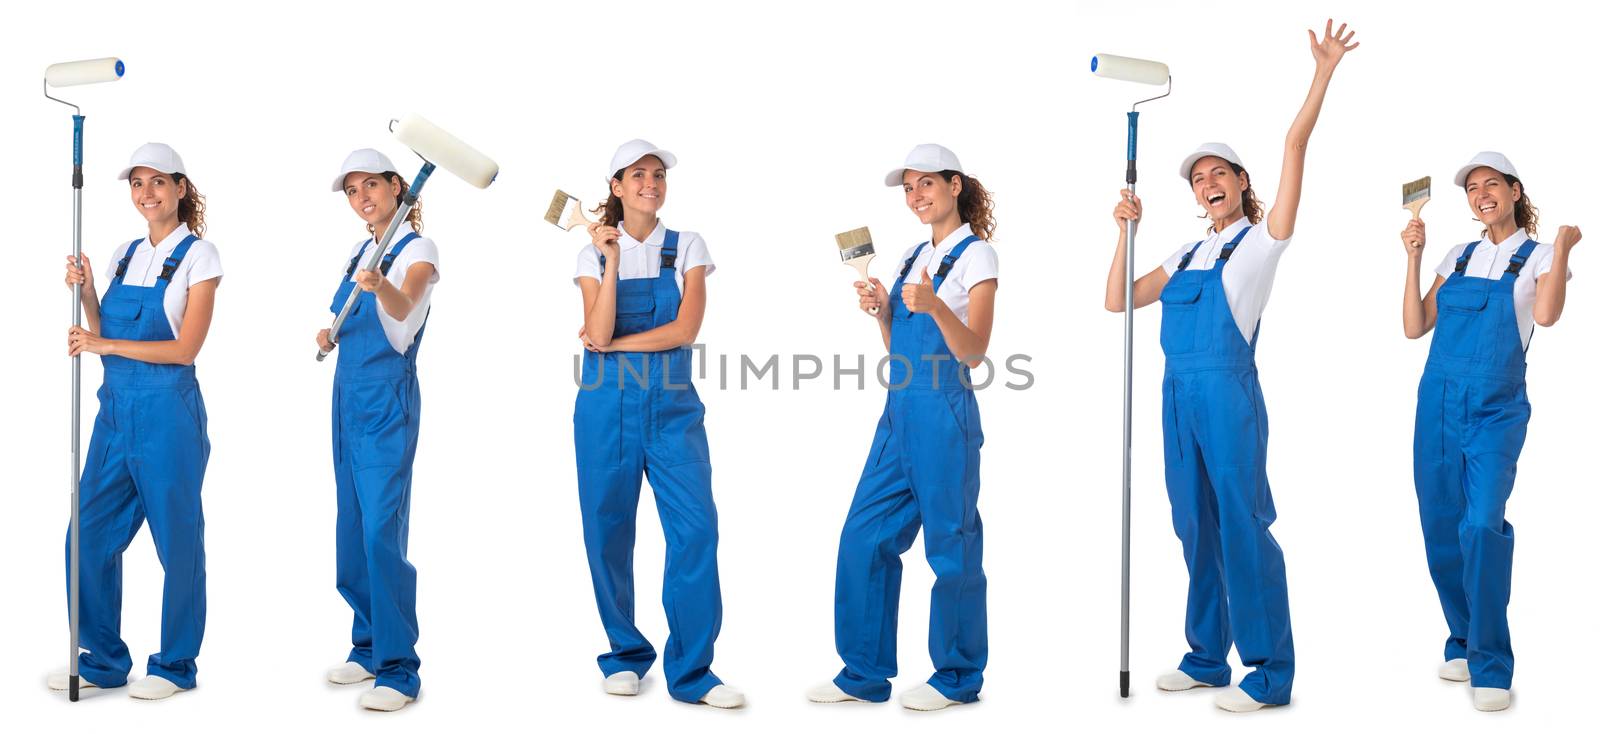 Set of images of house painter woman isolated on white background